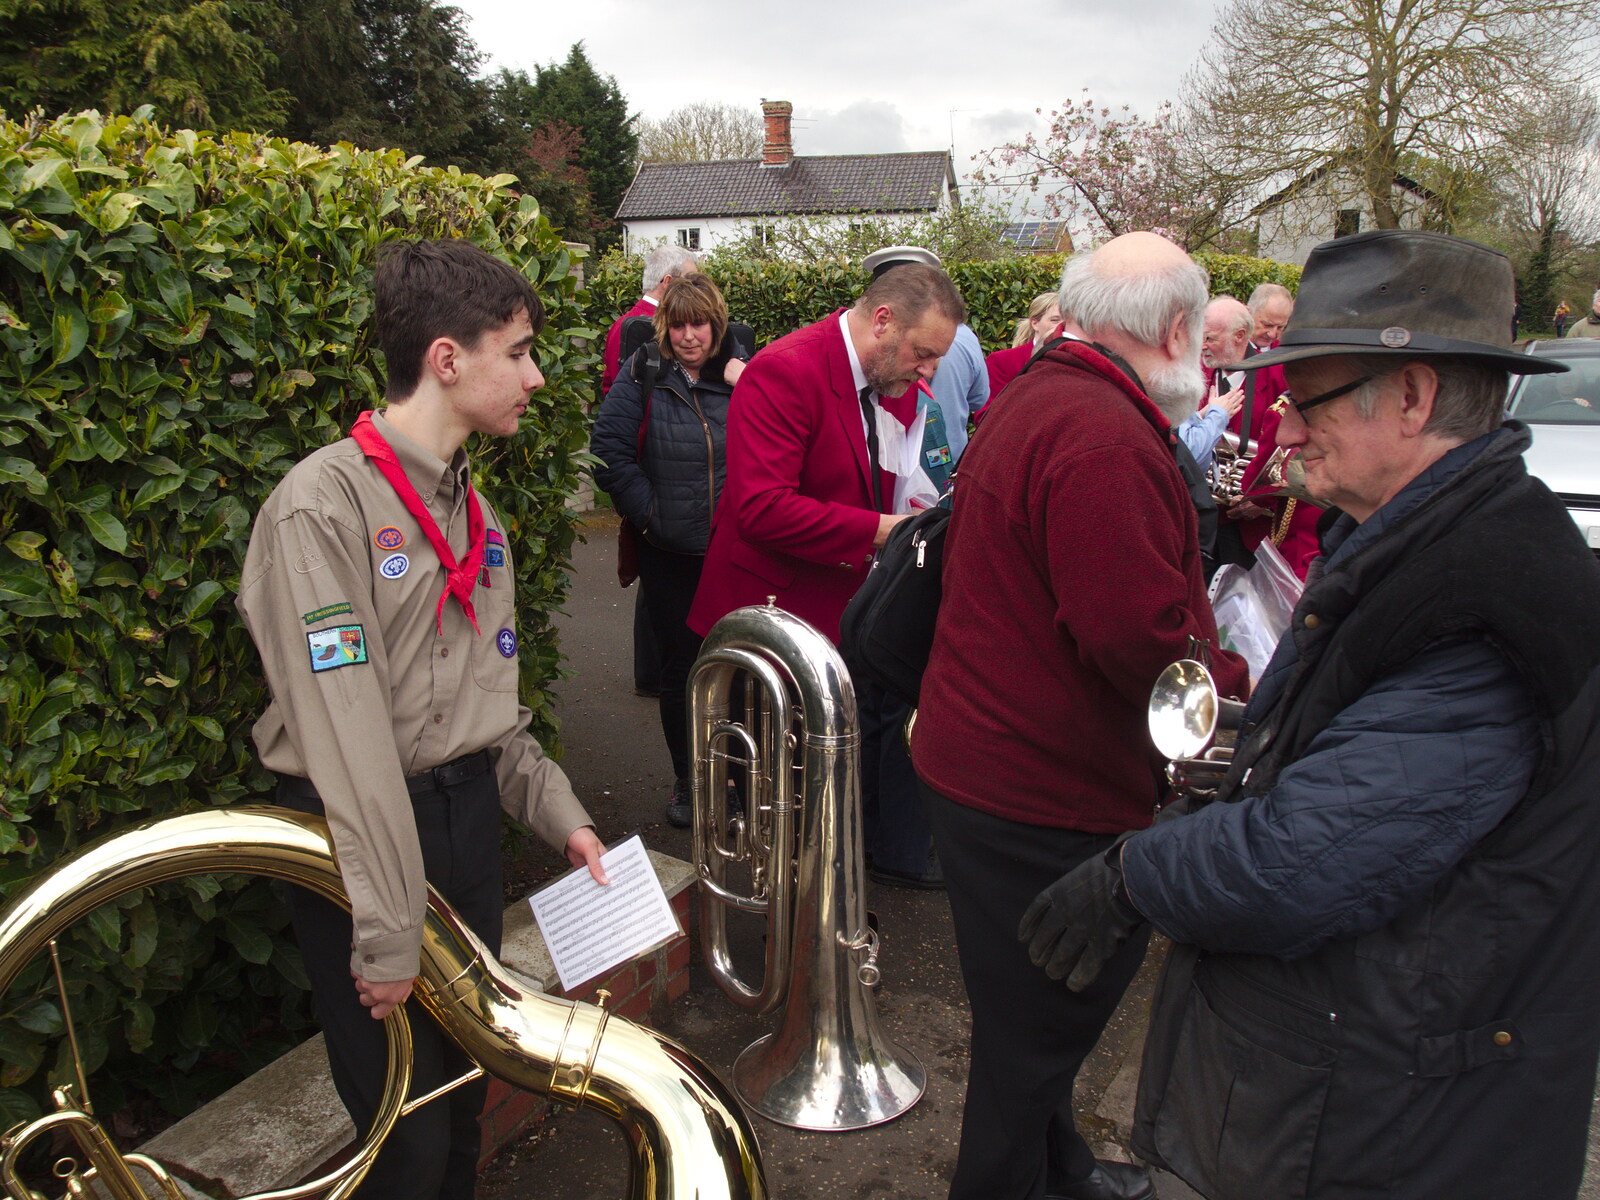 Bernard chats from A St. George's Day Parade, Dickleburgh, Norfolk - 28th April 2019